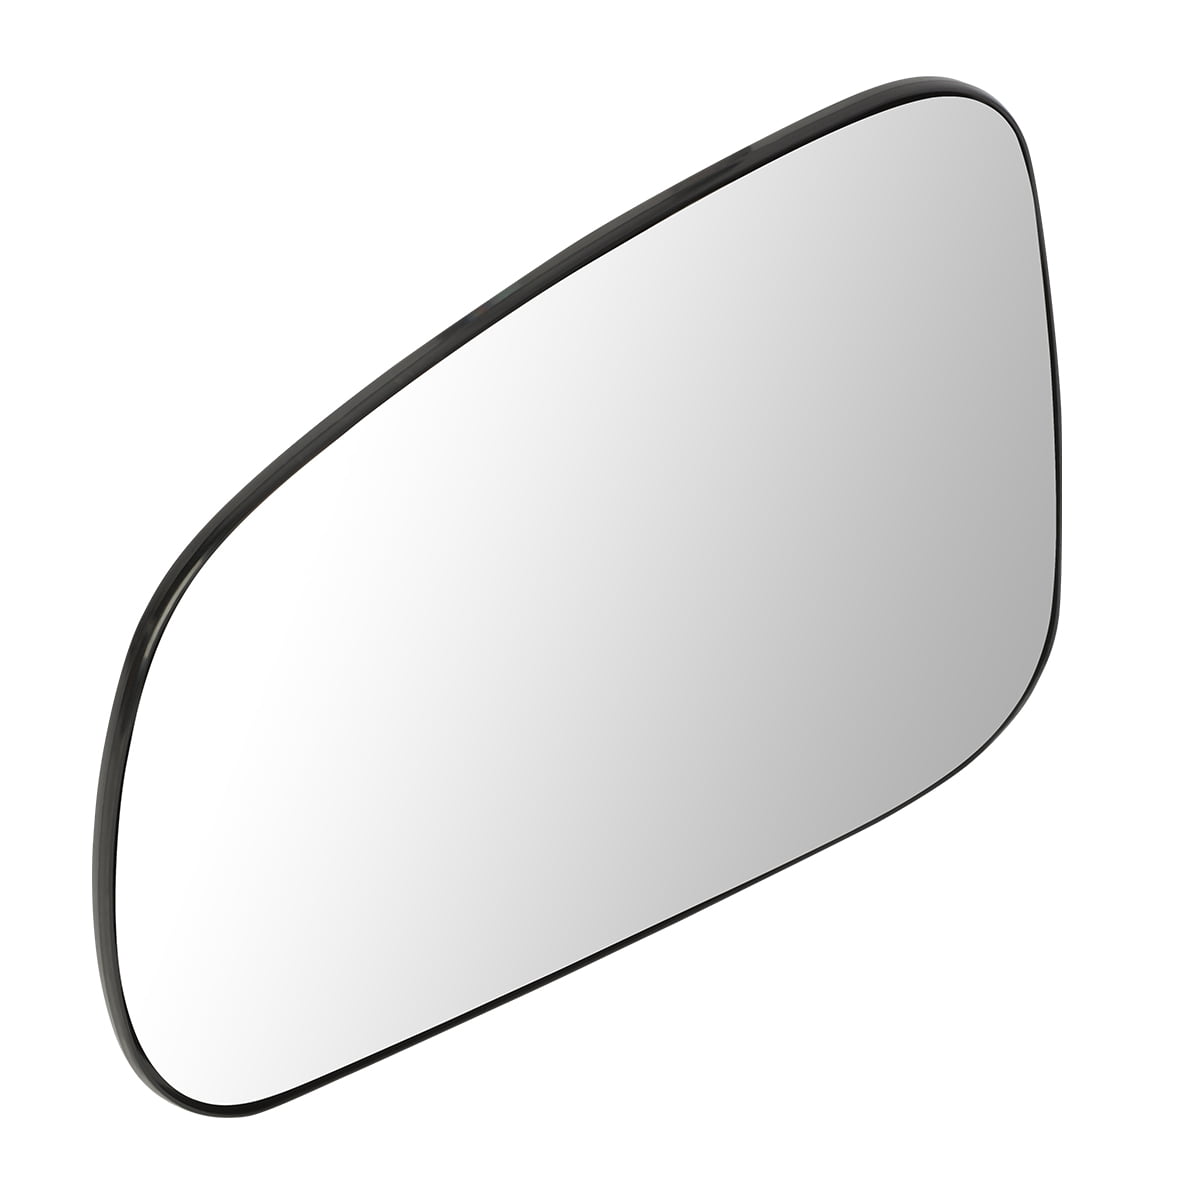 DNA Motoring OEM-MG-0256 19120302 OE Style Driver/Left Mirror Glass 